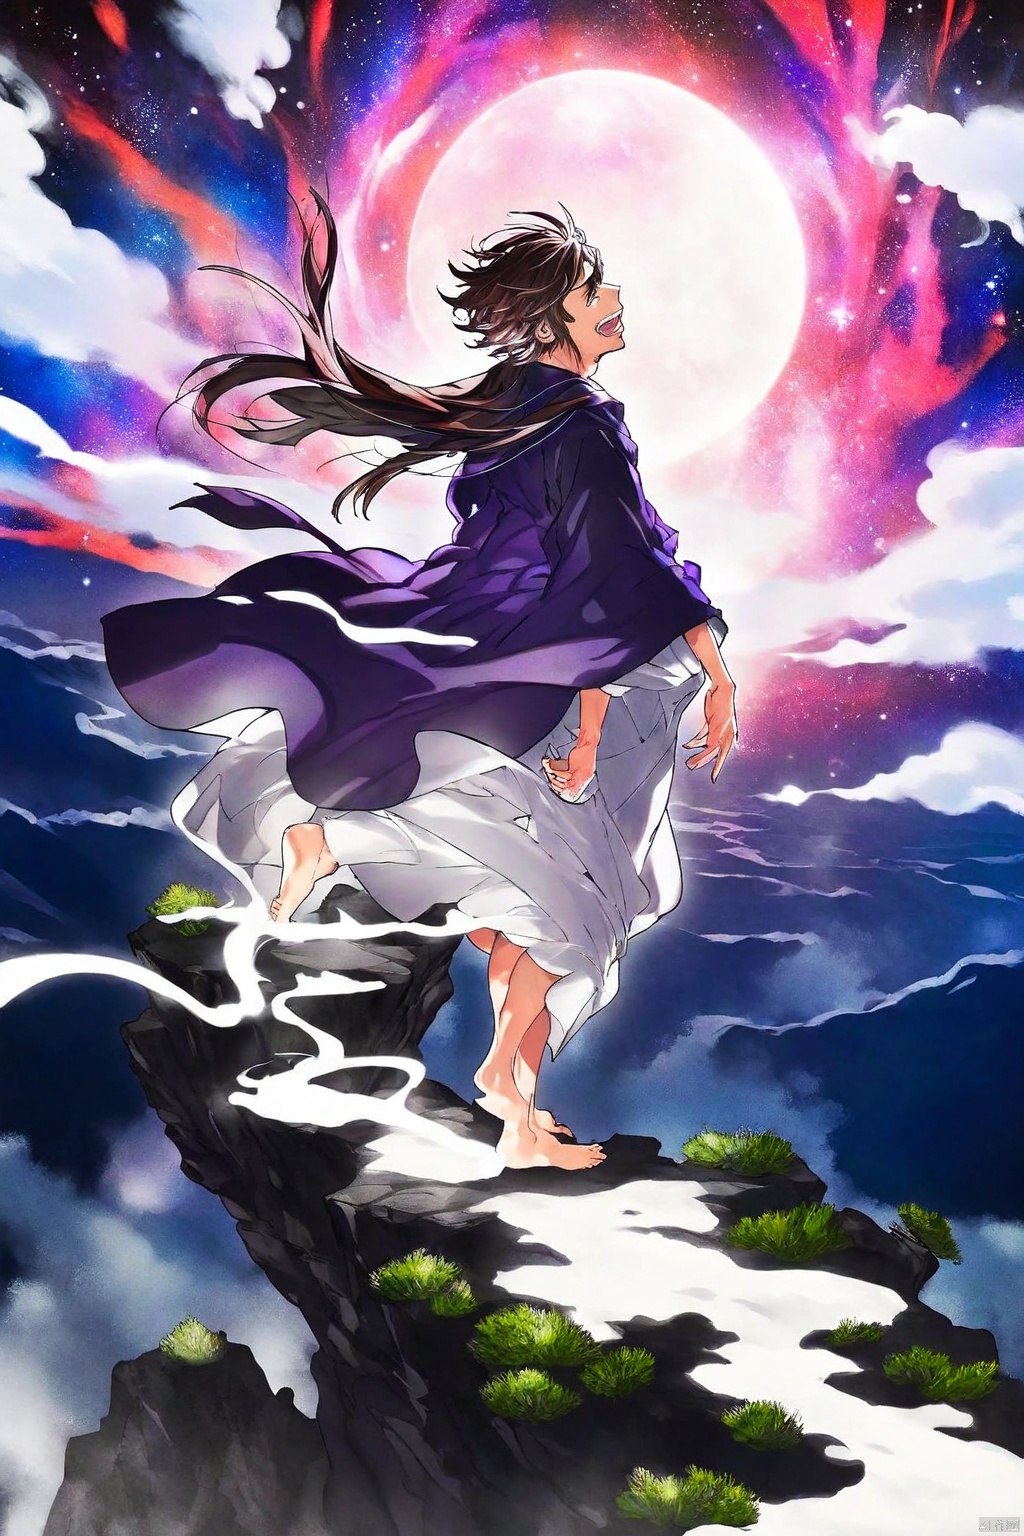 by mika pikazo, Tie dyeing style, Tie dyeing,Shinkai Makoto style, a whimsical digital illustration of a solitary figure standing on a cliff overlooking the vast starry sky. The figure has a wistful expression, his hair blown by the wind and his robe flowing. The sky is filled with rotating galaxies and constellations, creating a fantastic atmosphere. Bright colors, ethereal lights